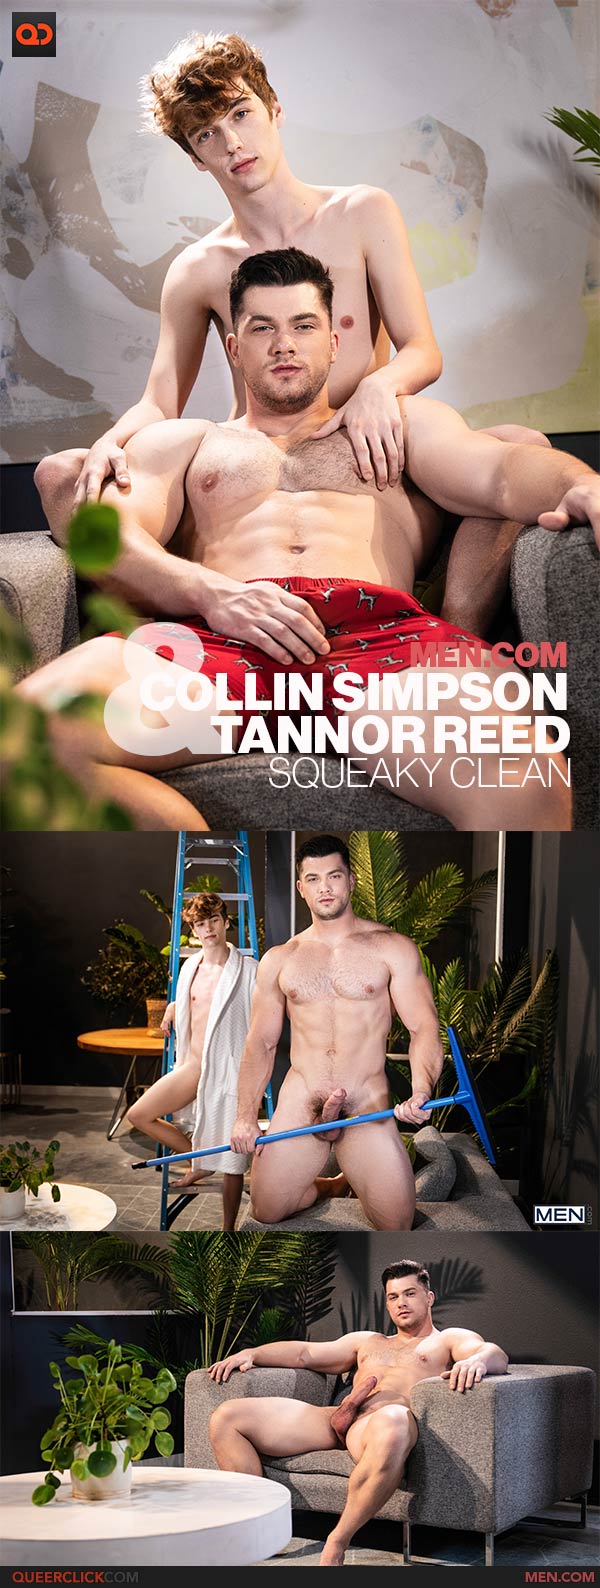 Men.com: Collin Simpson and Tannor Reed